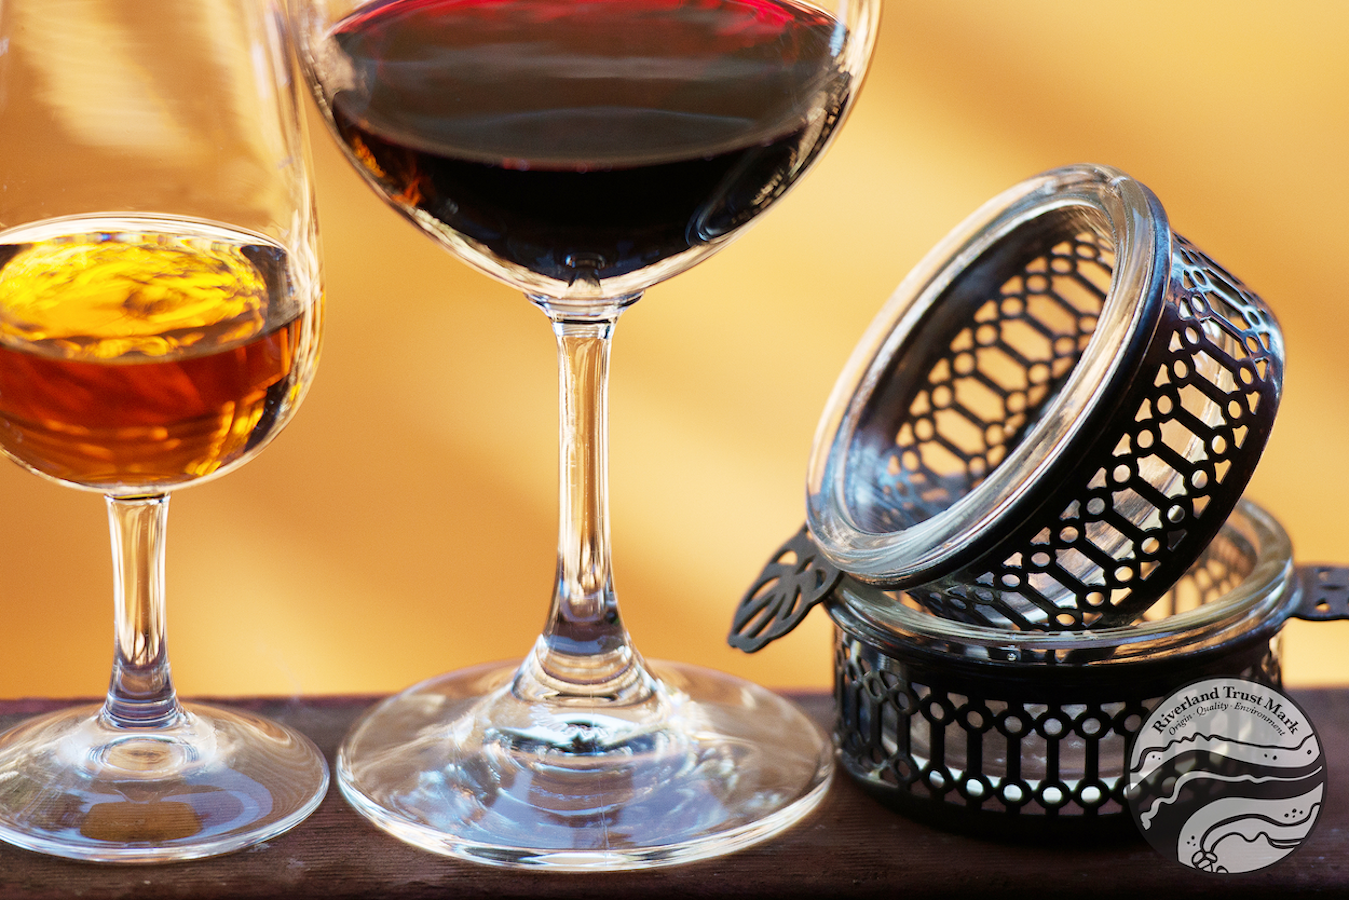 Artistically illuminated glasses of amber and red wine rest next to two decorative silver wine tasters